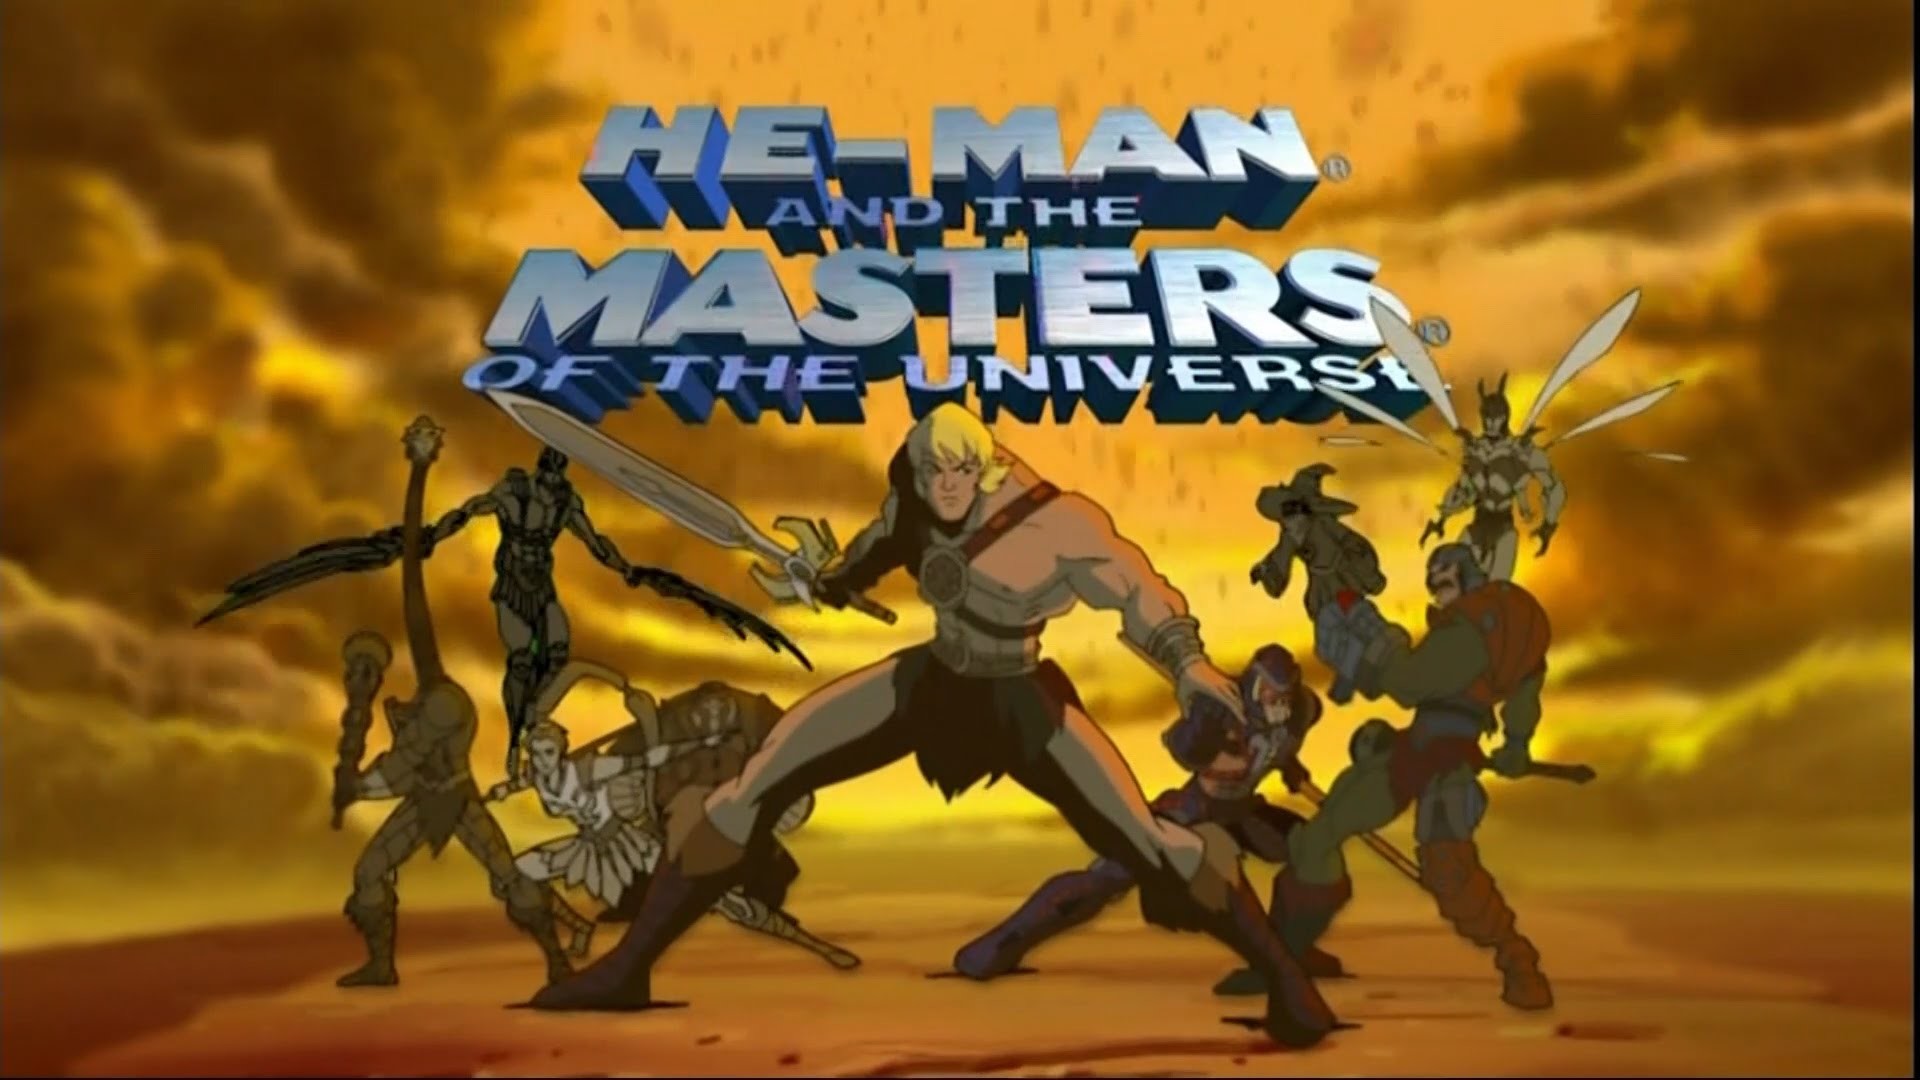 Awesome 80s Cartoon and TV Show Intros He Man and the Masters of the Universe, New Adventures. – YouTube